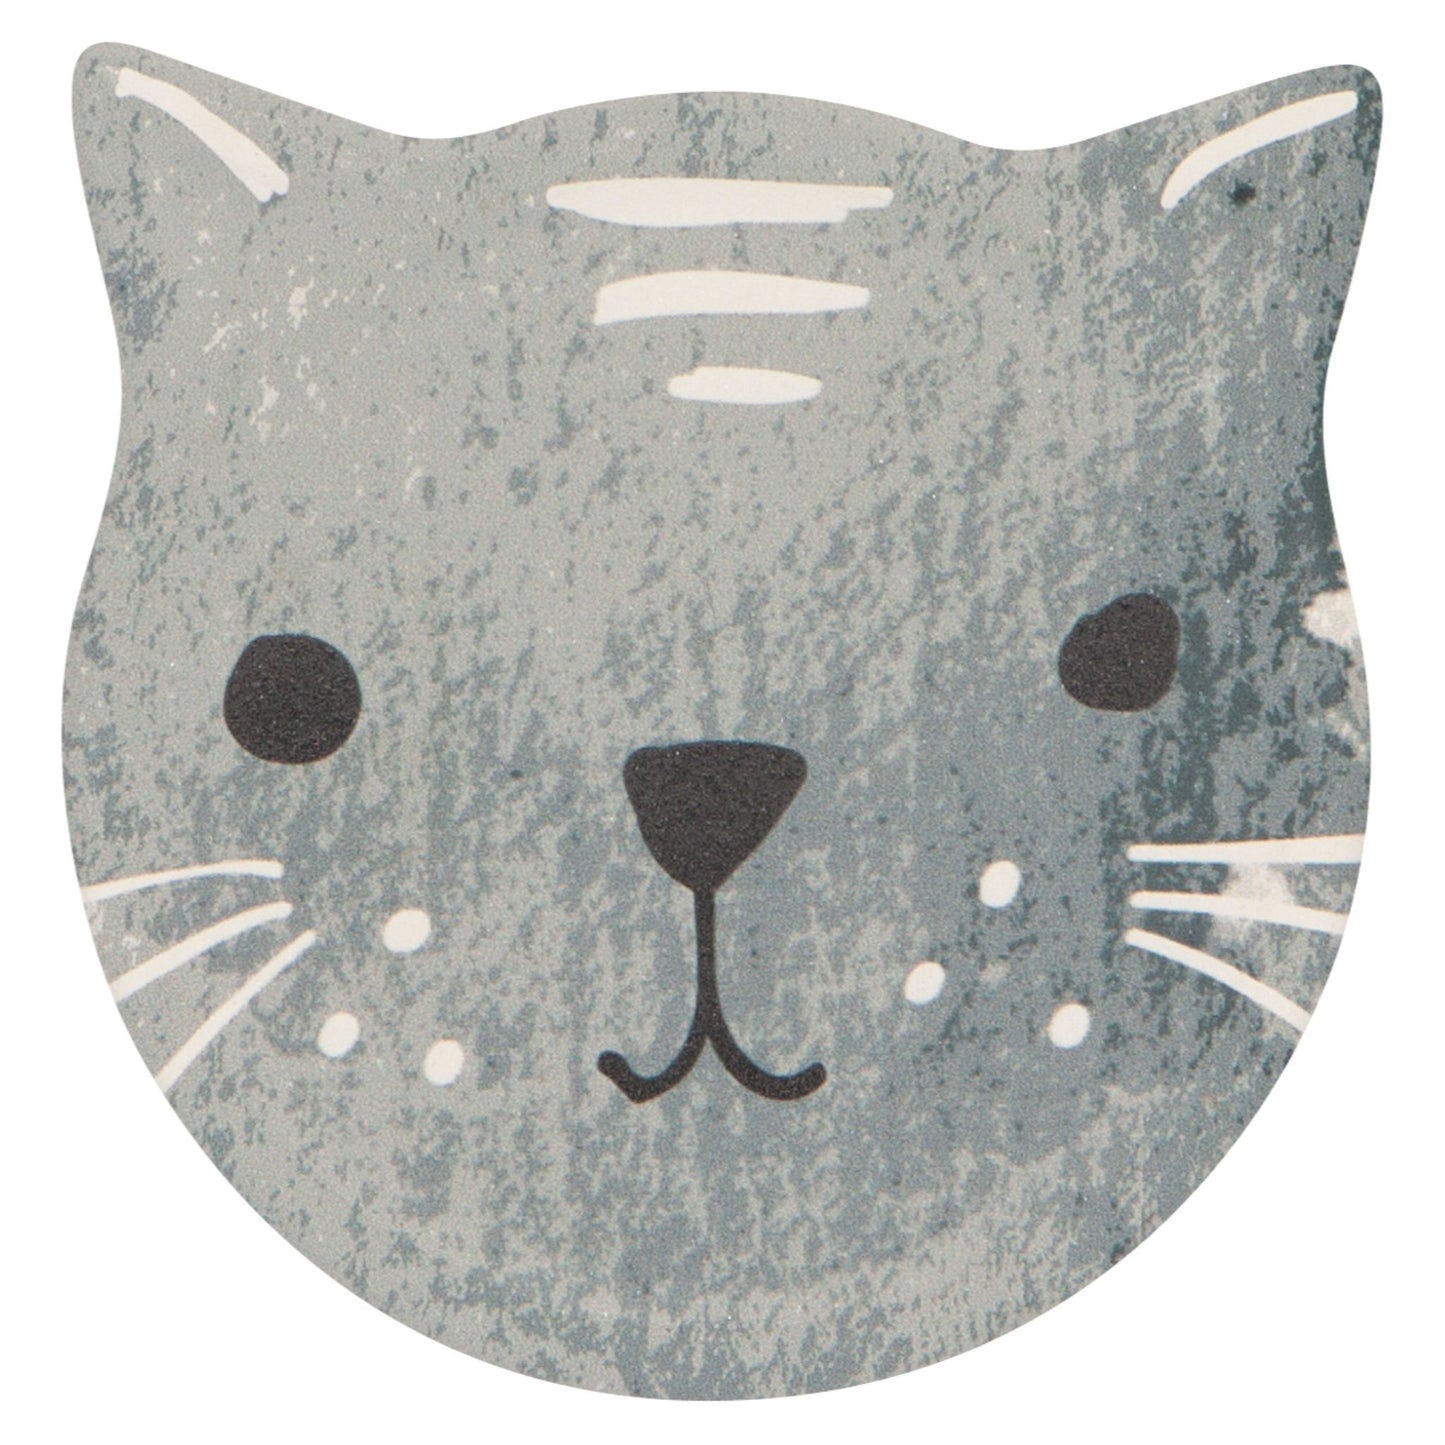 "The Cats Meow": Soak Up Coasters (Set of 4) - Tiny Tiger Gift Shop